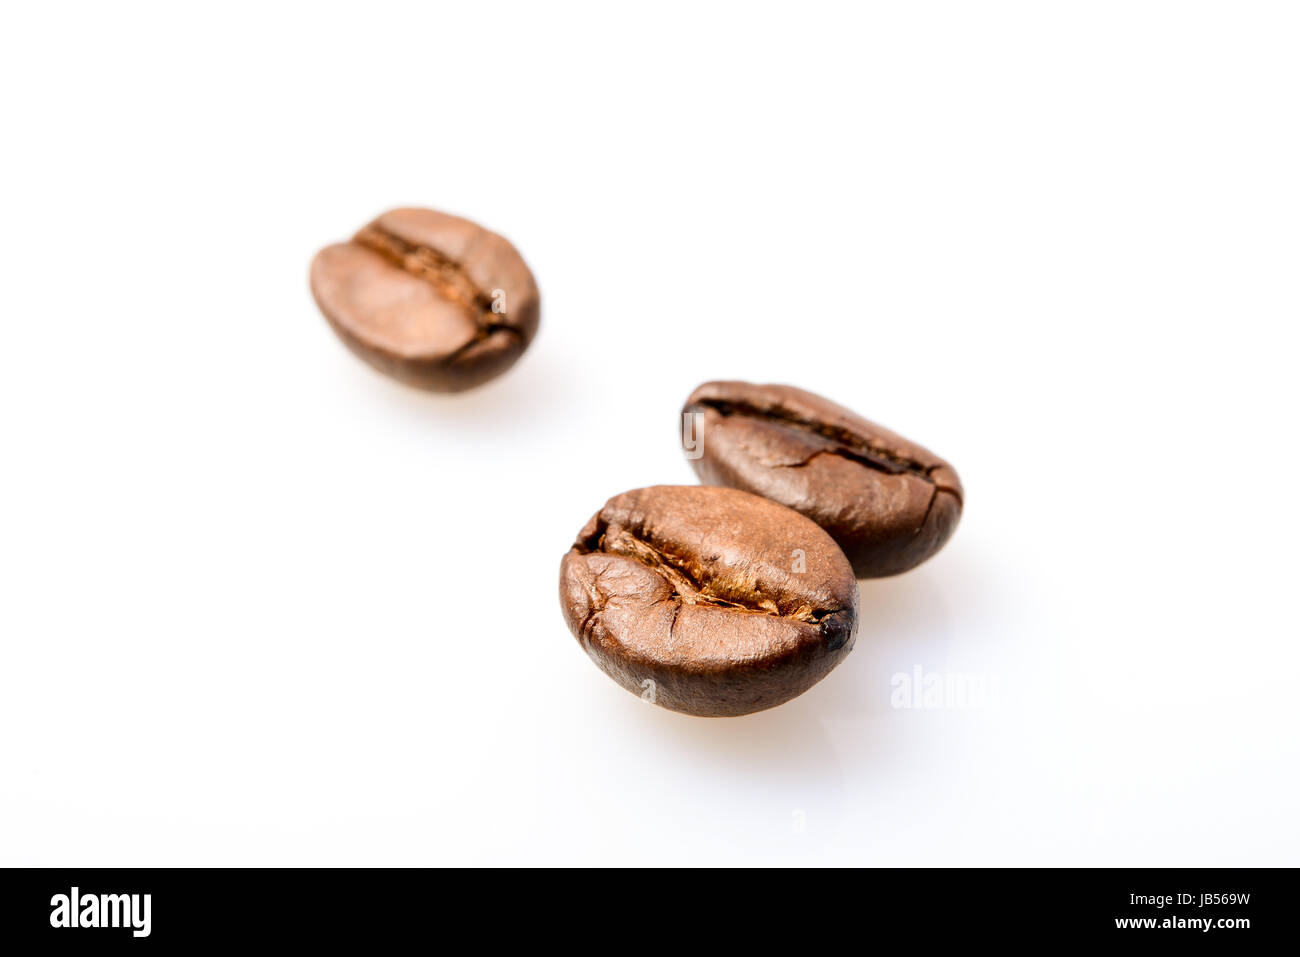 Macro photografy of coffee beans isolated on a white background Stock Photo